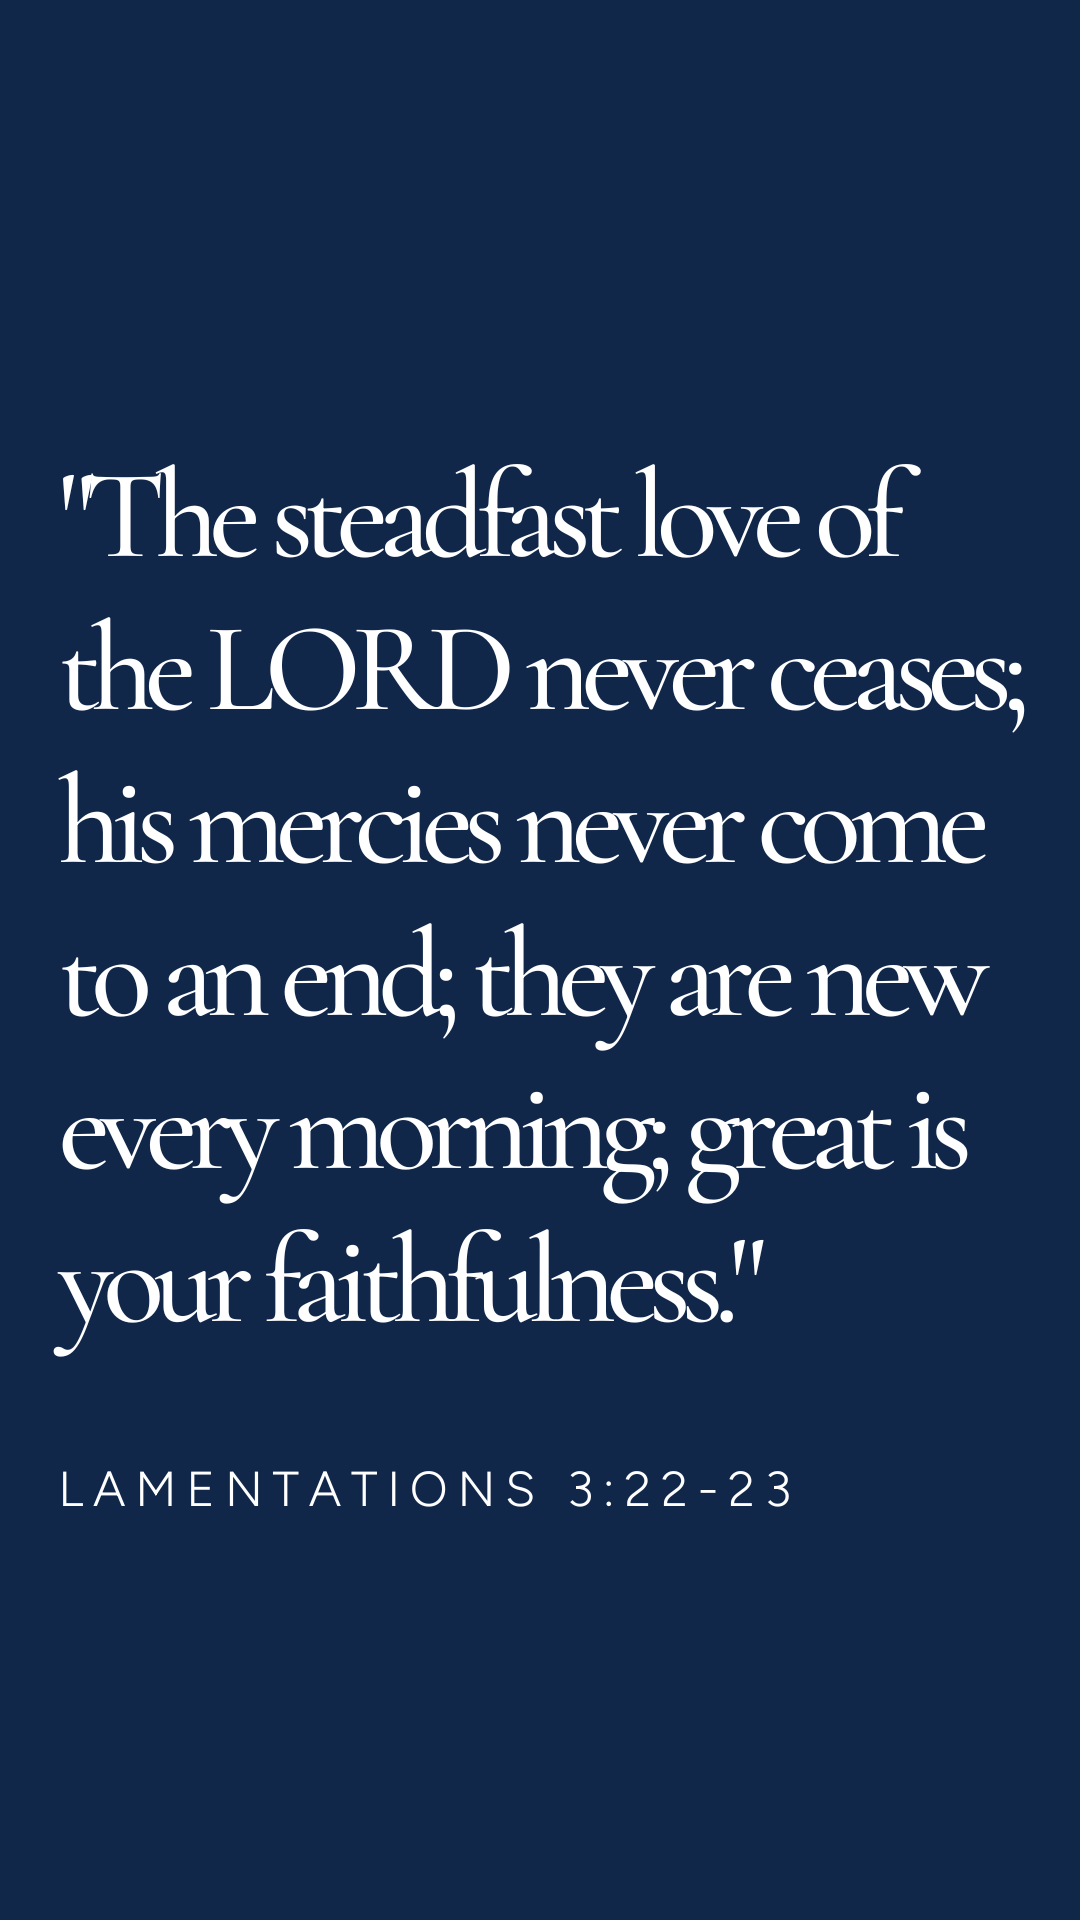 Graphic that reads: "The steadfast love of the Lord never ceases; his mercies never come to an end; they are new every morning, great is your faithfulness."